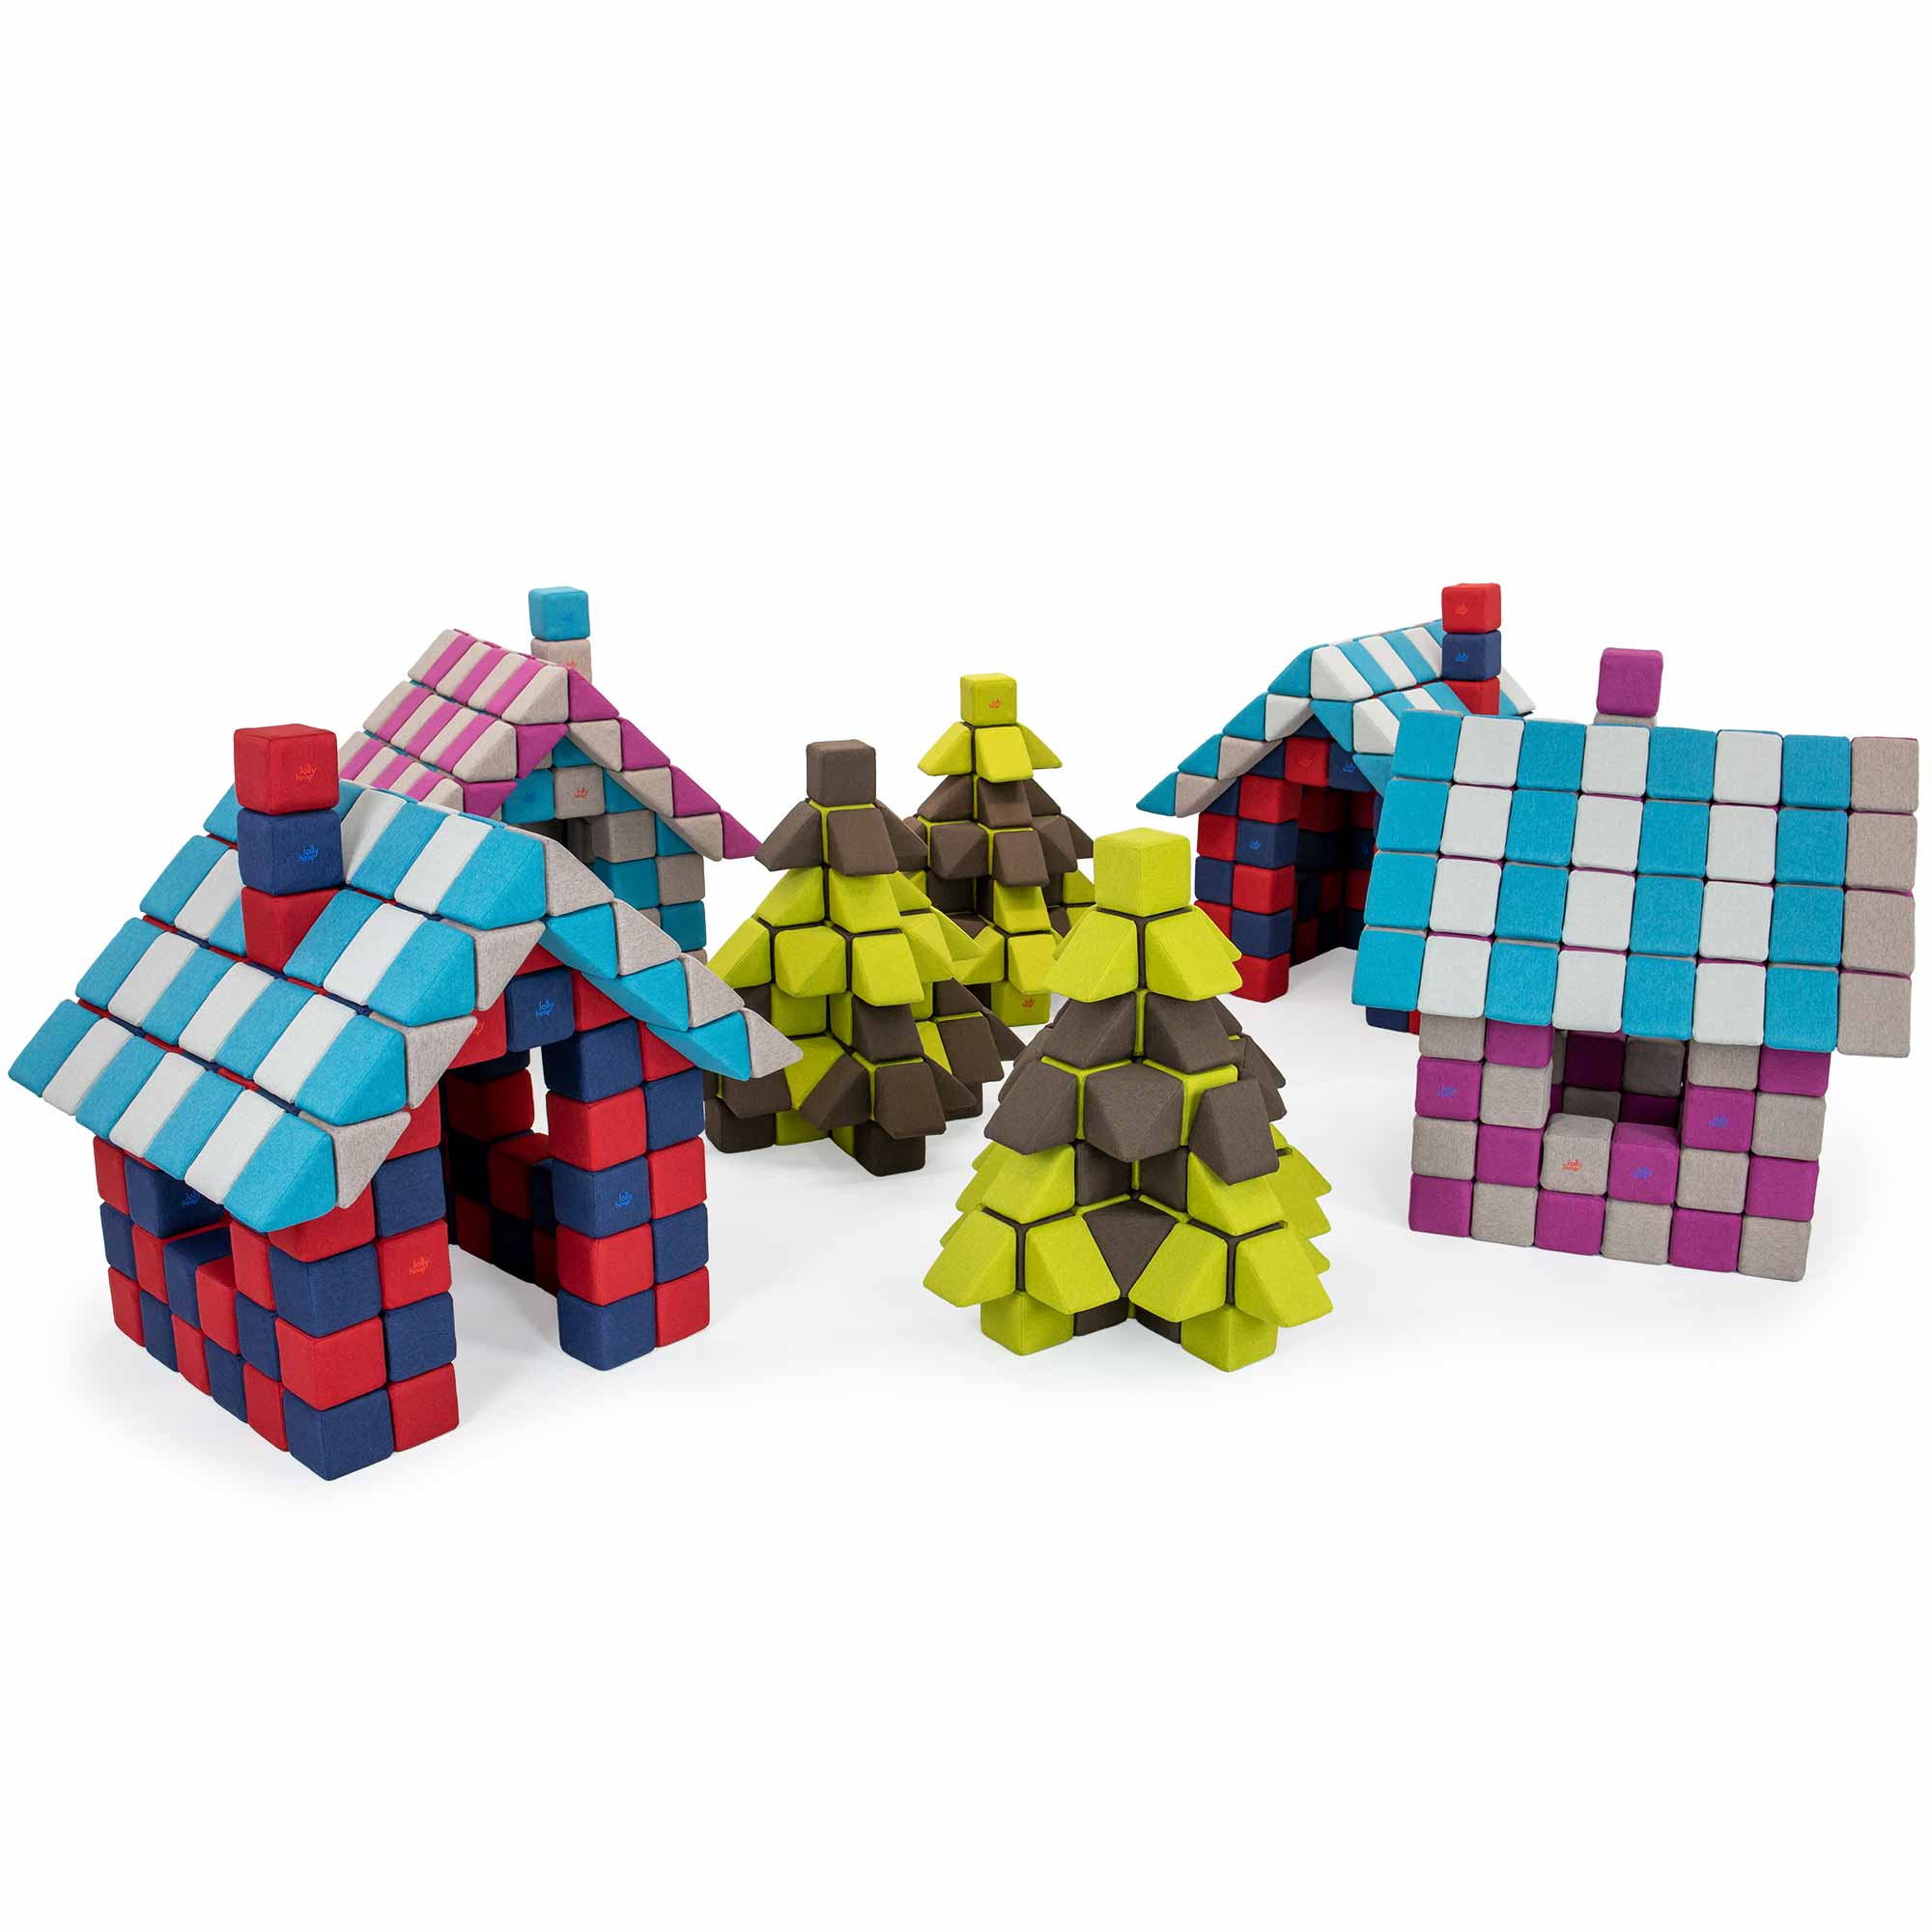 JollyHeap - Soft Magnetic Construction Toy